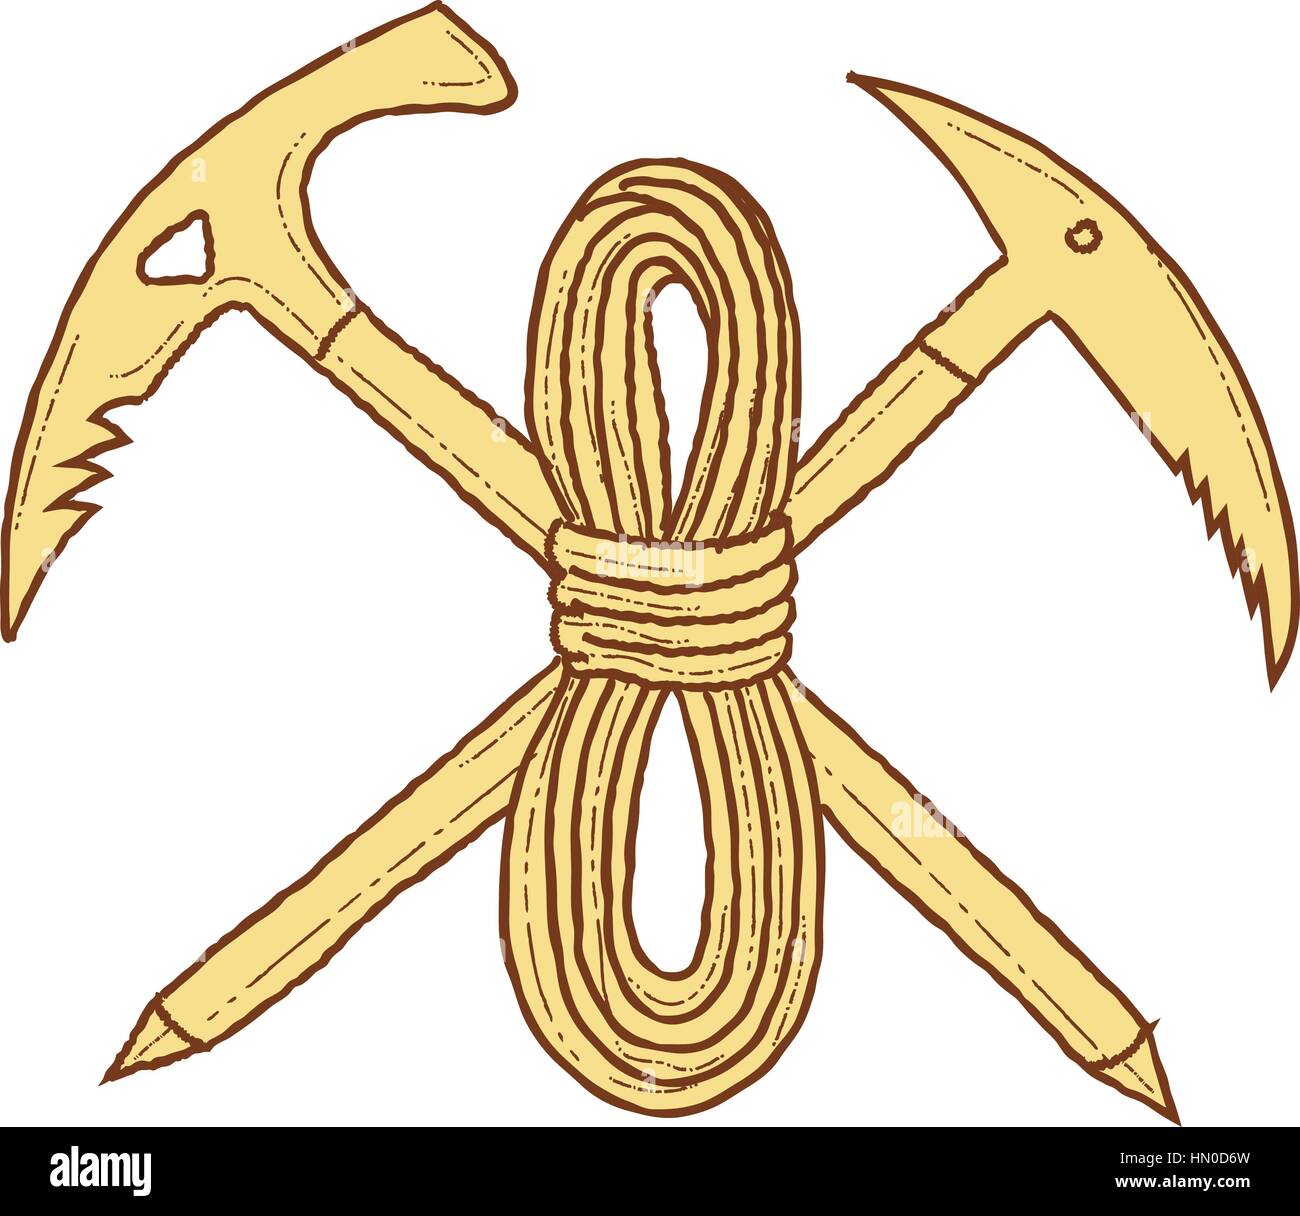 Drawing sketch style illustration of a mountain climbing pick axe crossed with rope viewed from front set on isolated white background. Stock Vector